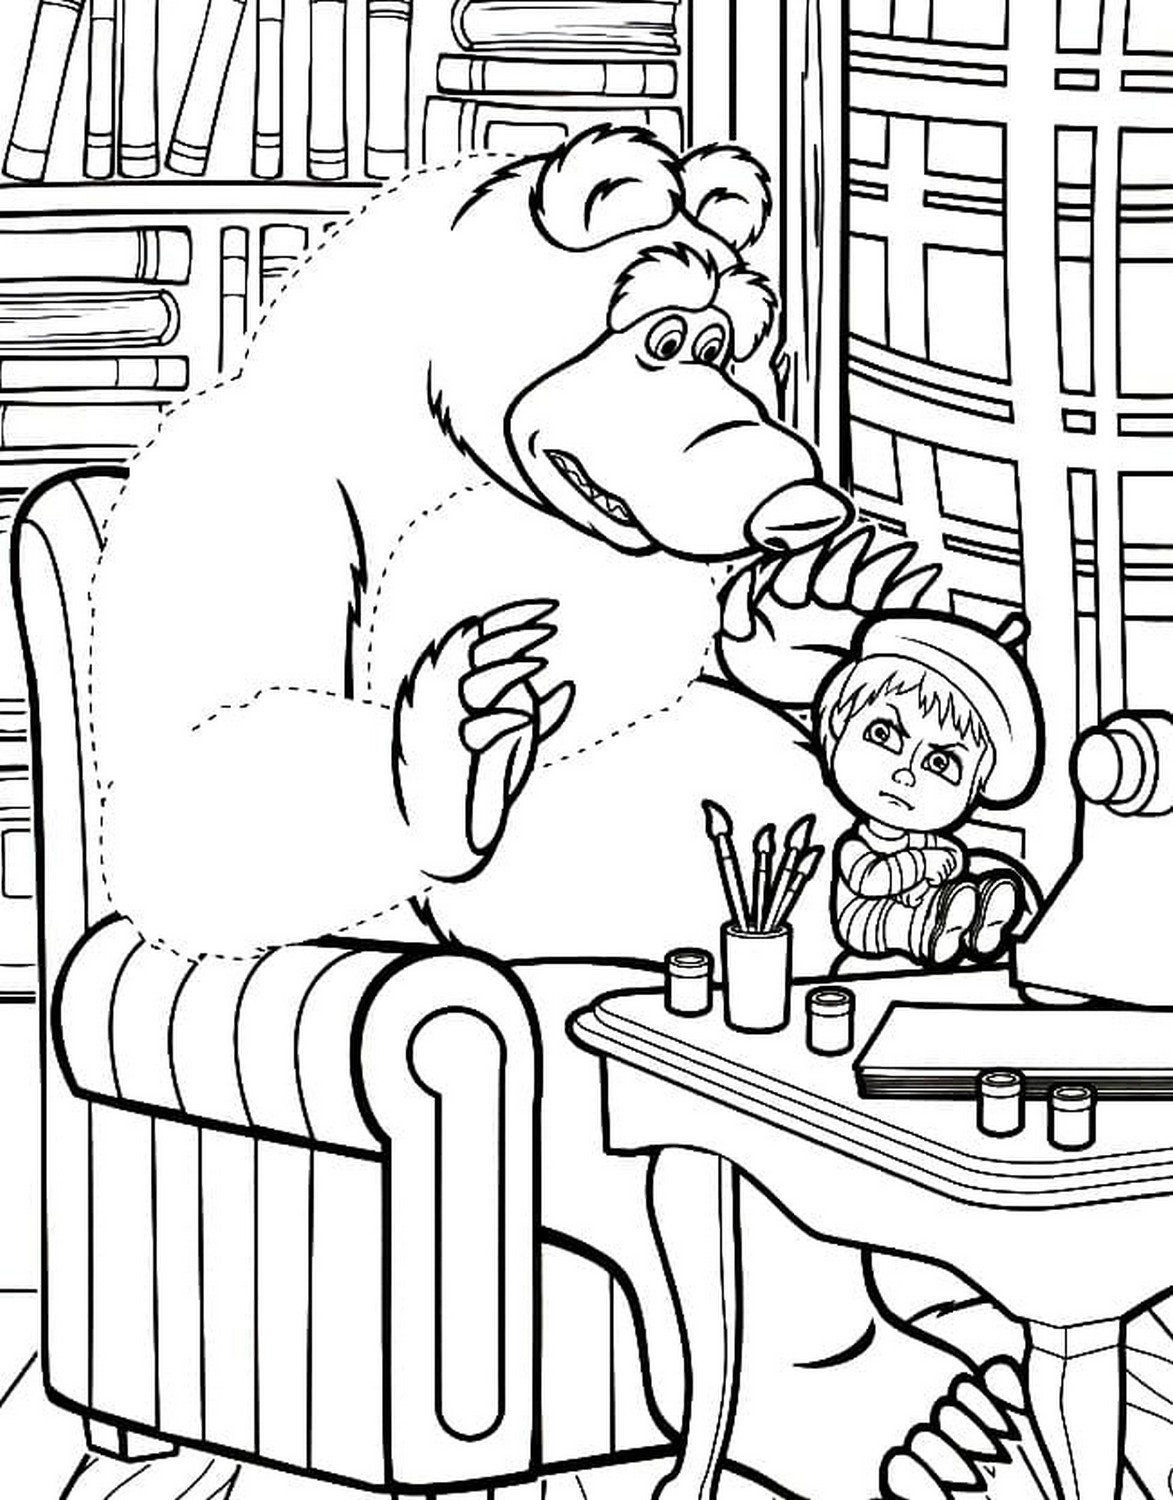 Masha and the Bear 54  coloring page to print and coloring